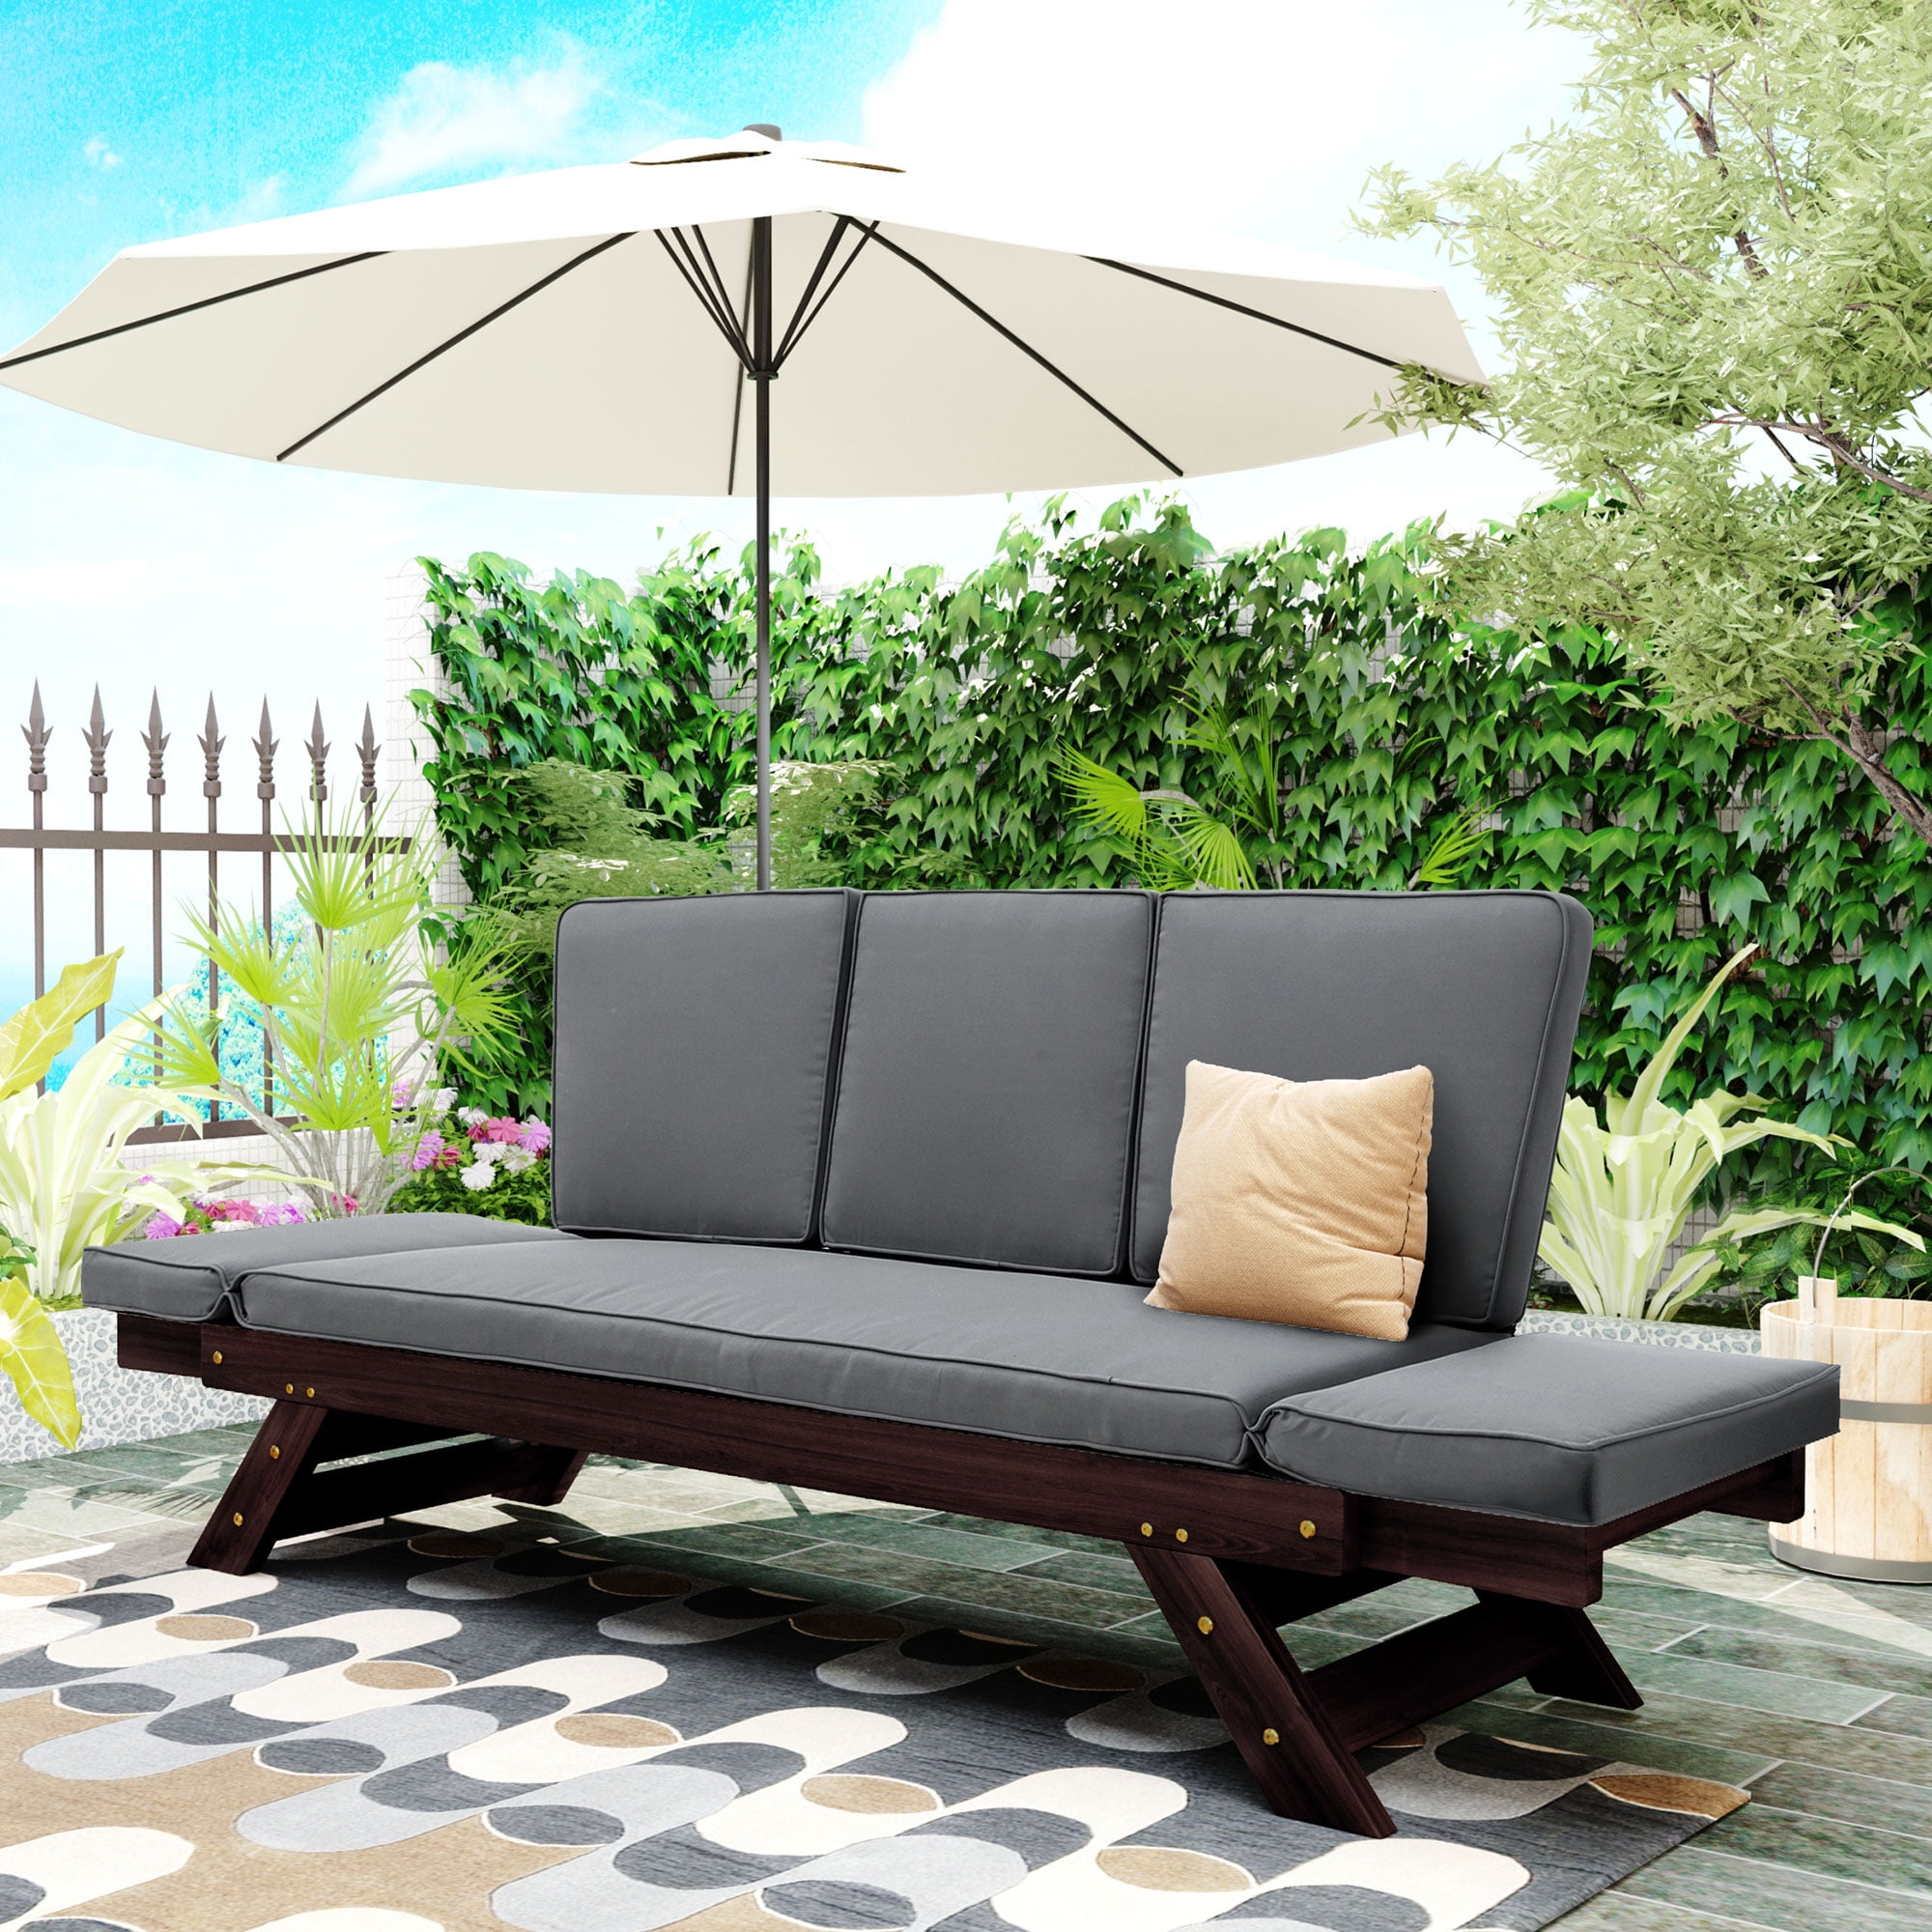 SYNGAR Outdoor Convertible Daybed, Wooden Lounge Sofa for Outside, Patio Adjustable Furniture with Gray Cushions, for Balcony, Poolside, Deck, D7424 - Walmart.com